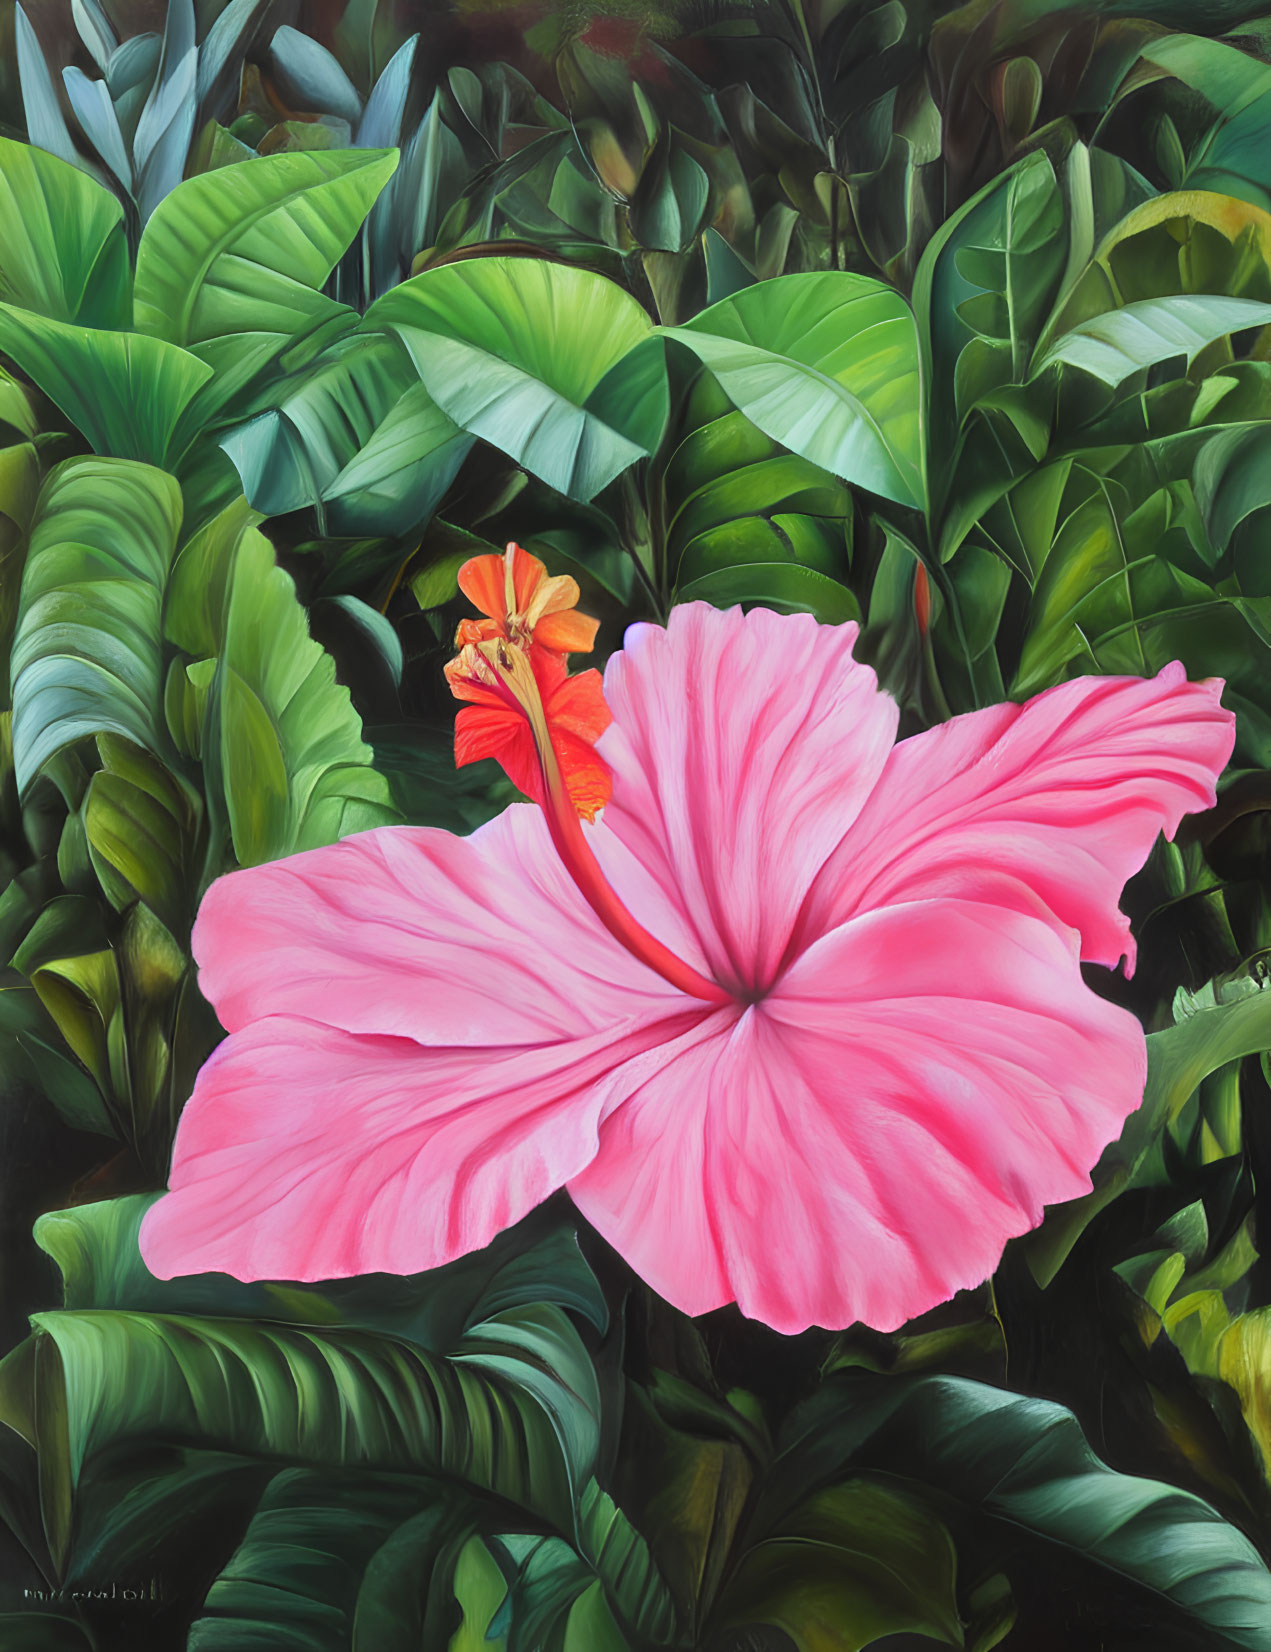 Vibrant Pink Hibiscus with Red Stamen Among Green Leaves